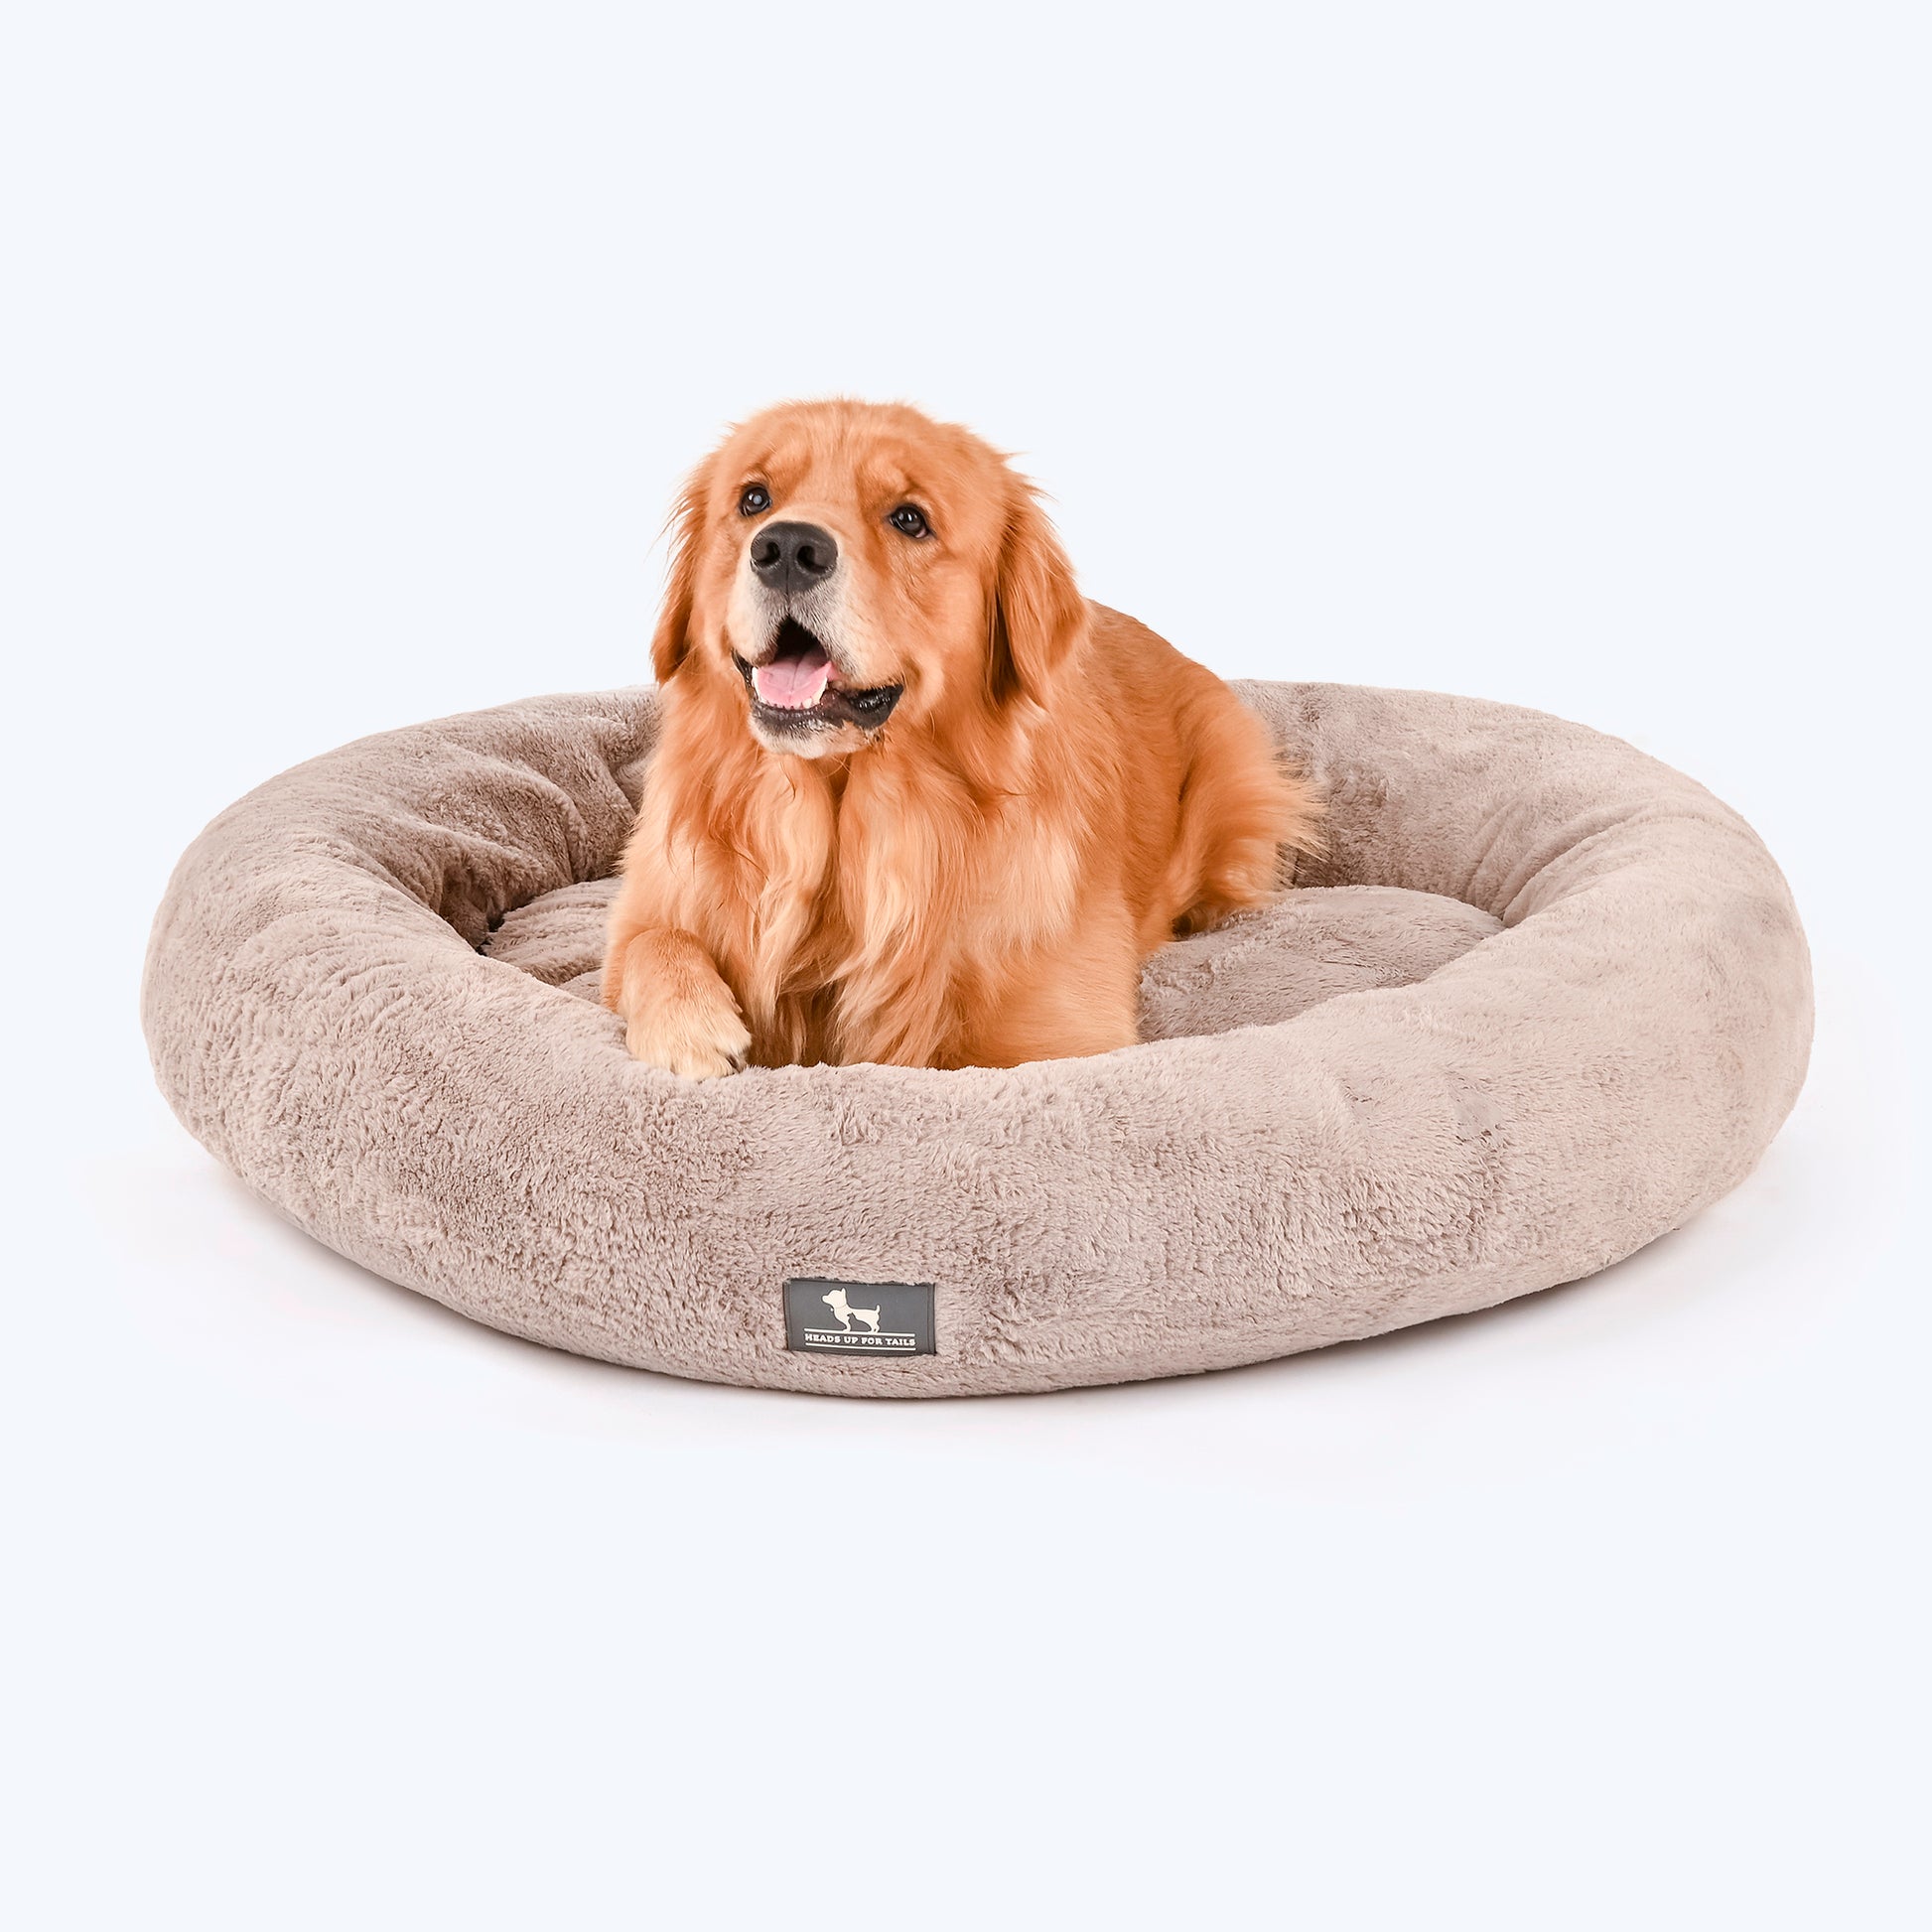 HUFT Jumbo Donut Bed For Dogs - Grey (Made To Order) - Heads Up For Tails